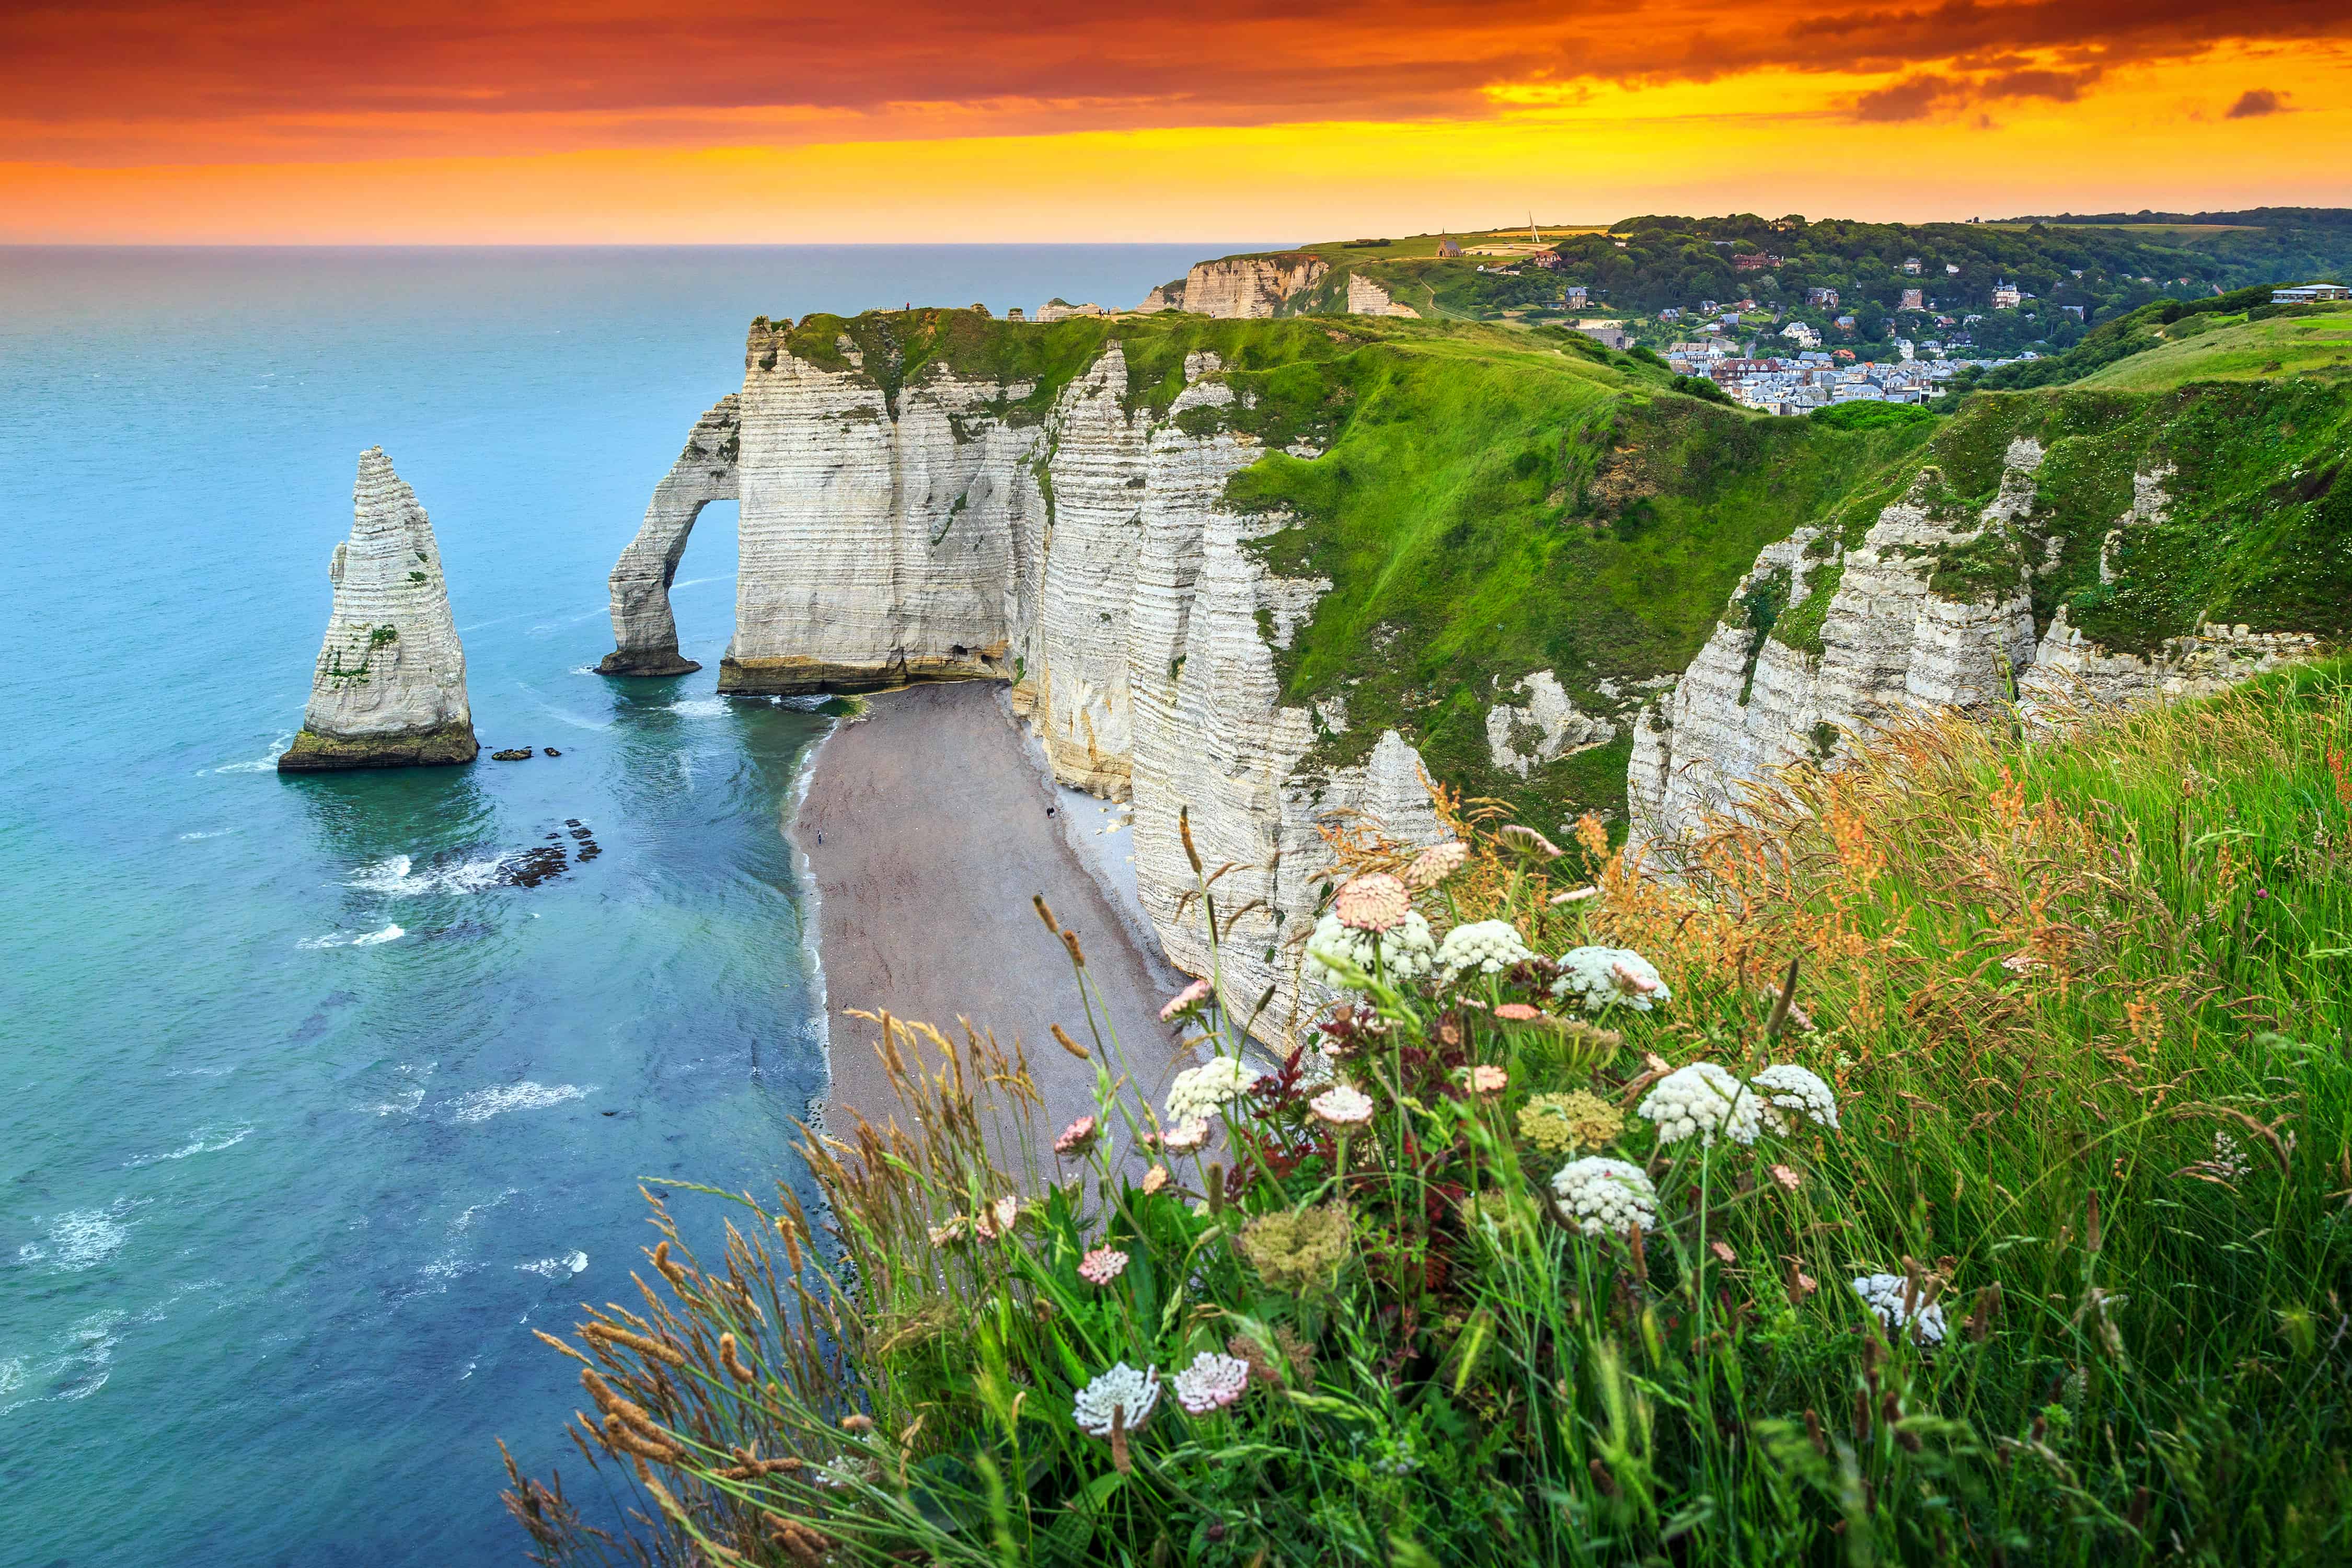 Sunset on Etretat in Northern France